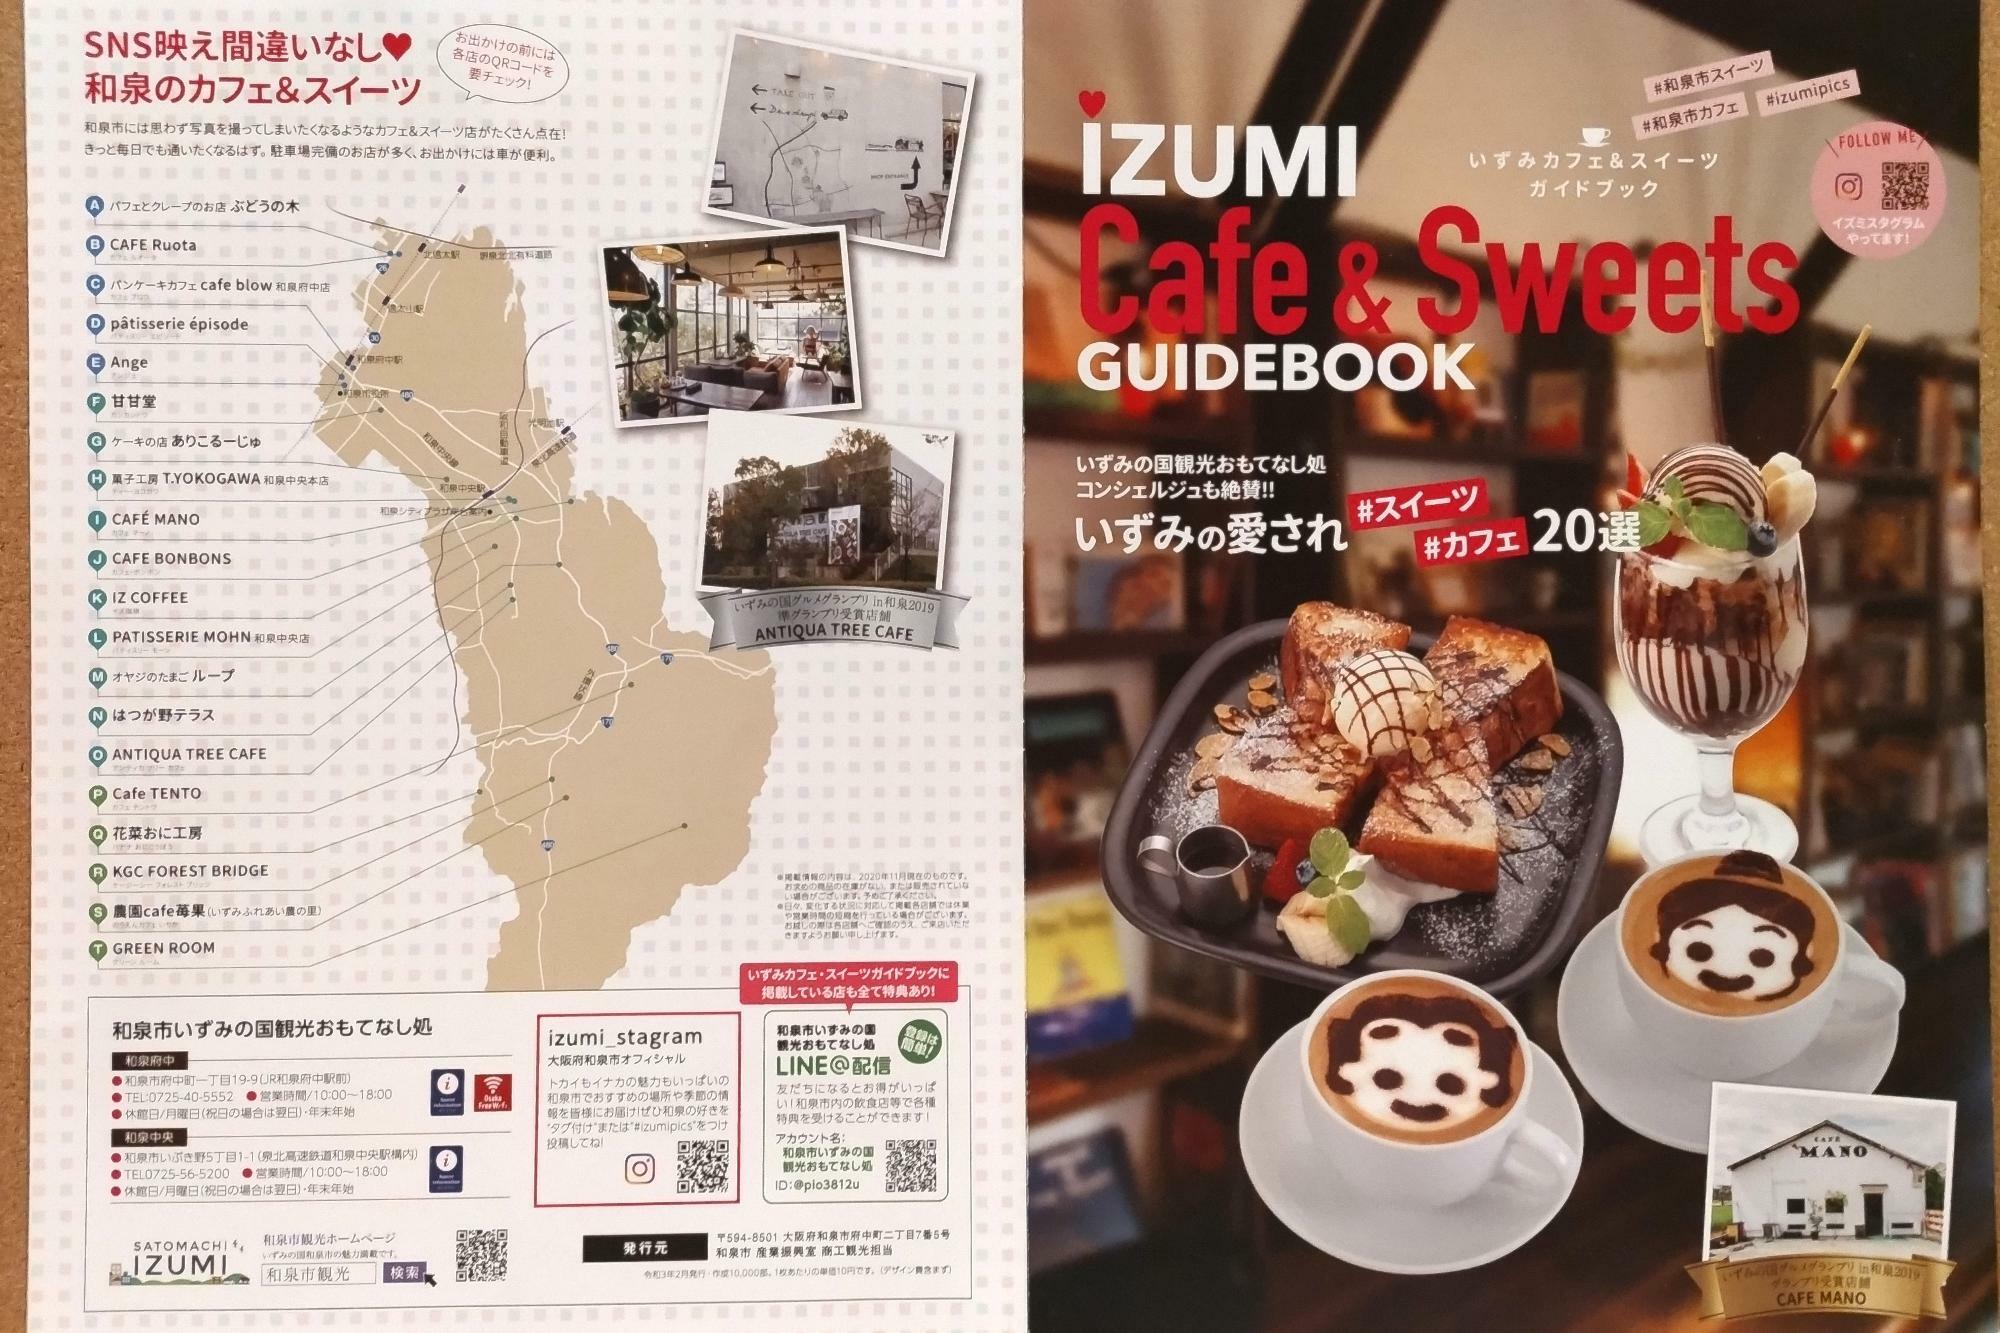 IZUMI Cafe & Sweets GUIDEBOOK